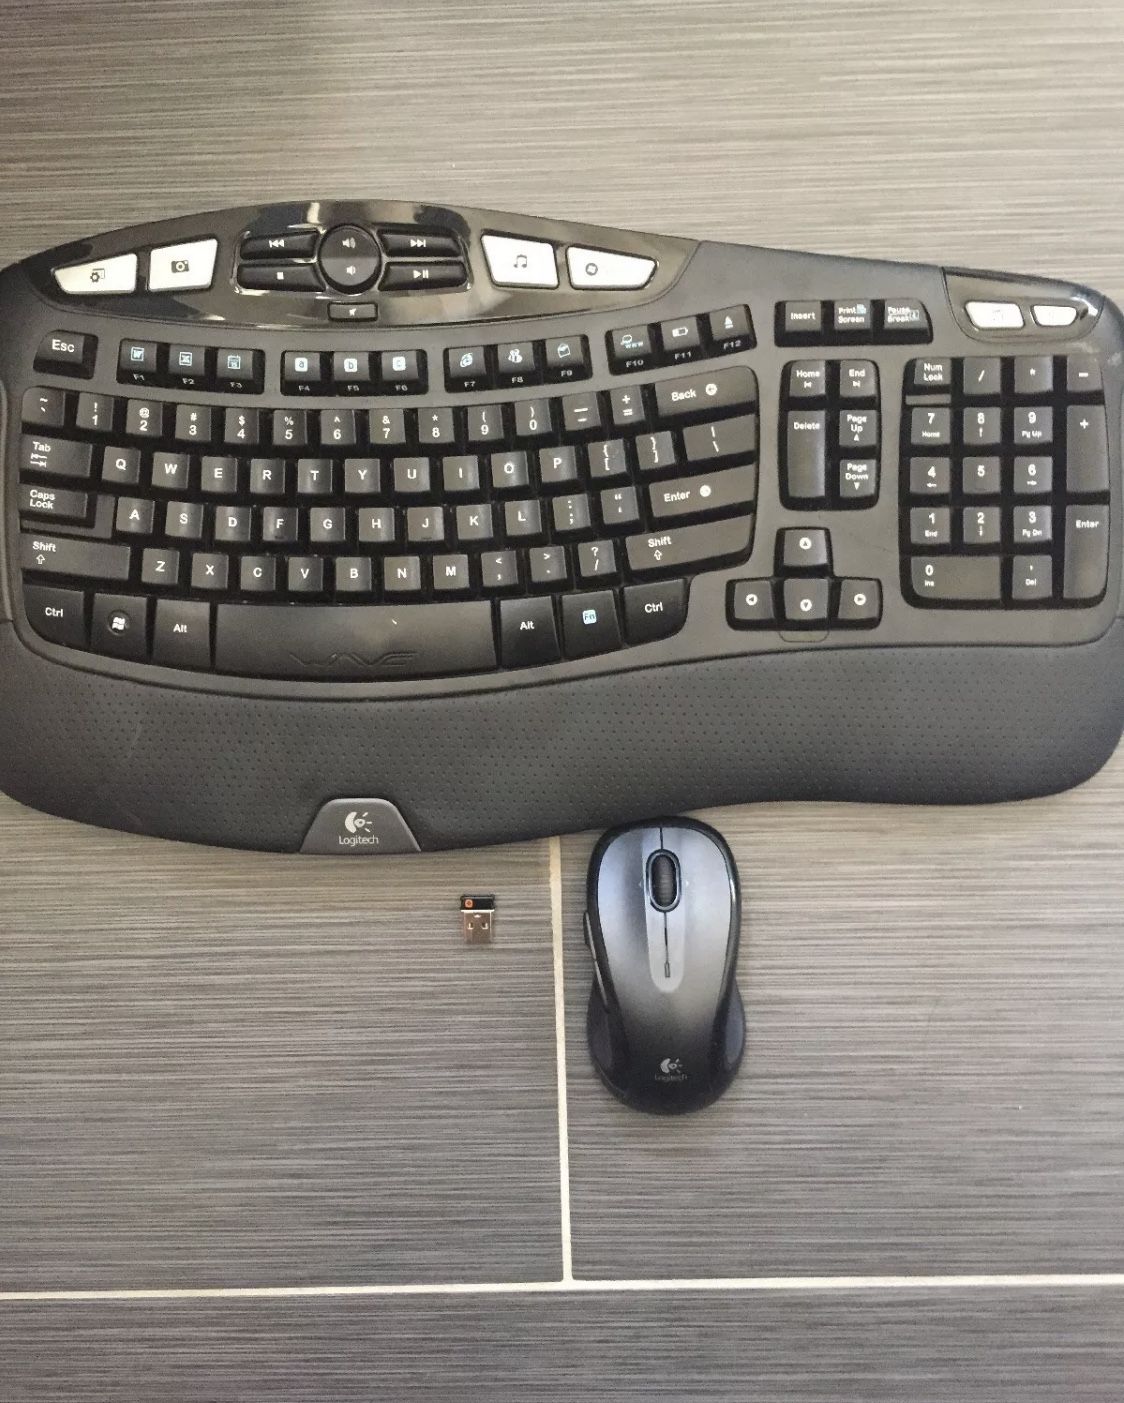 Wireless keyboard and mouse combo. With dongle / receiver and batteries.